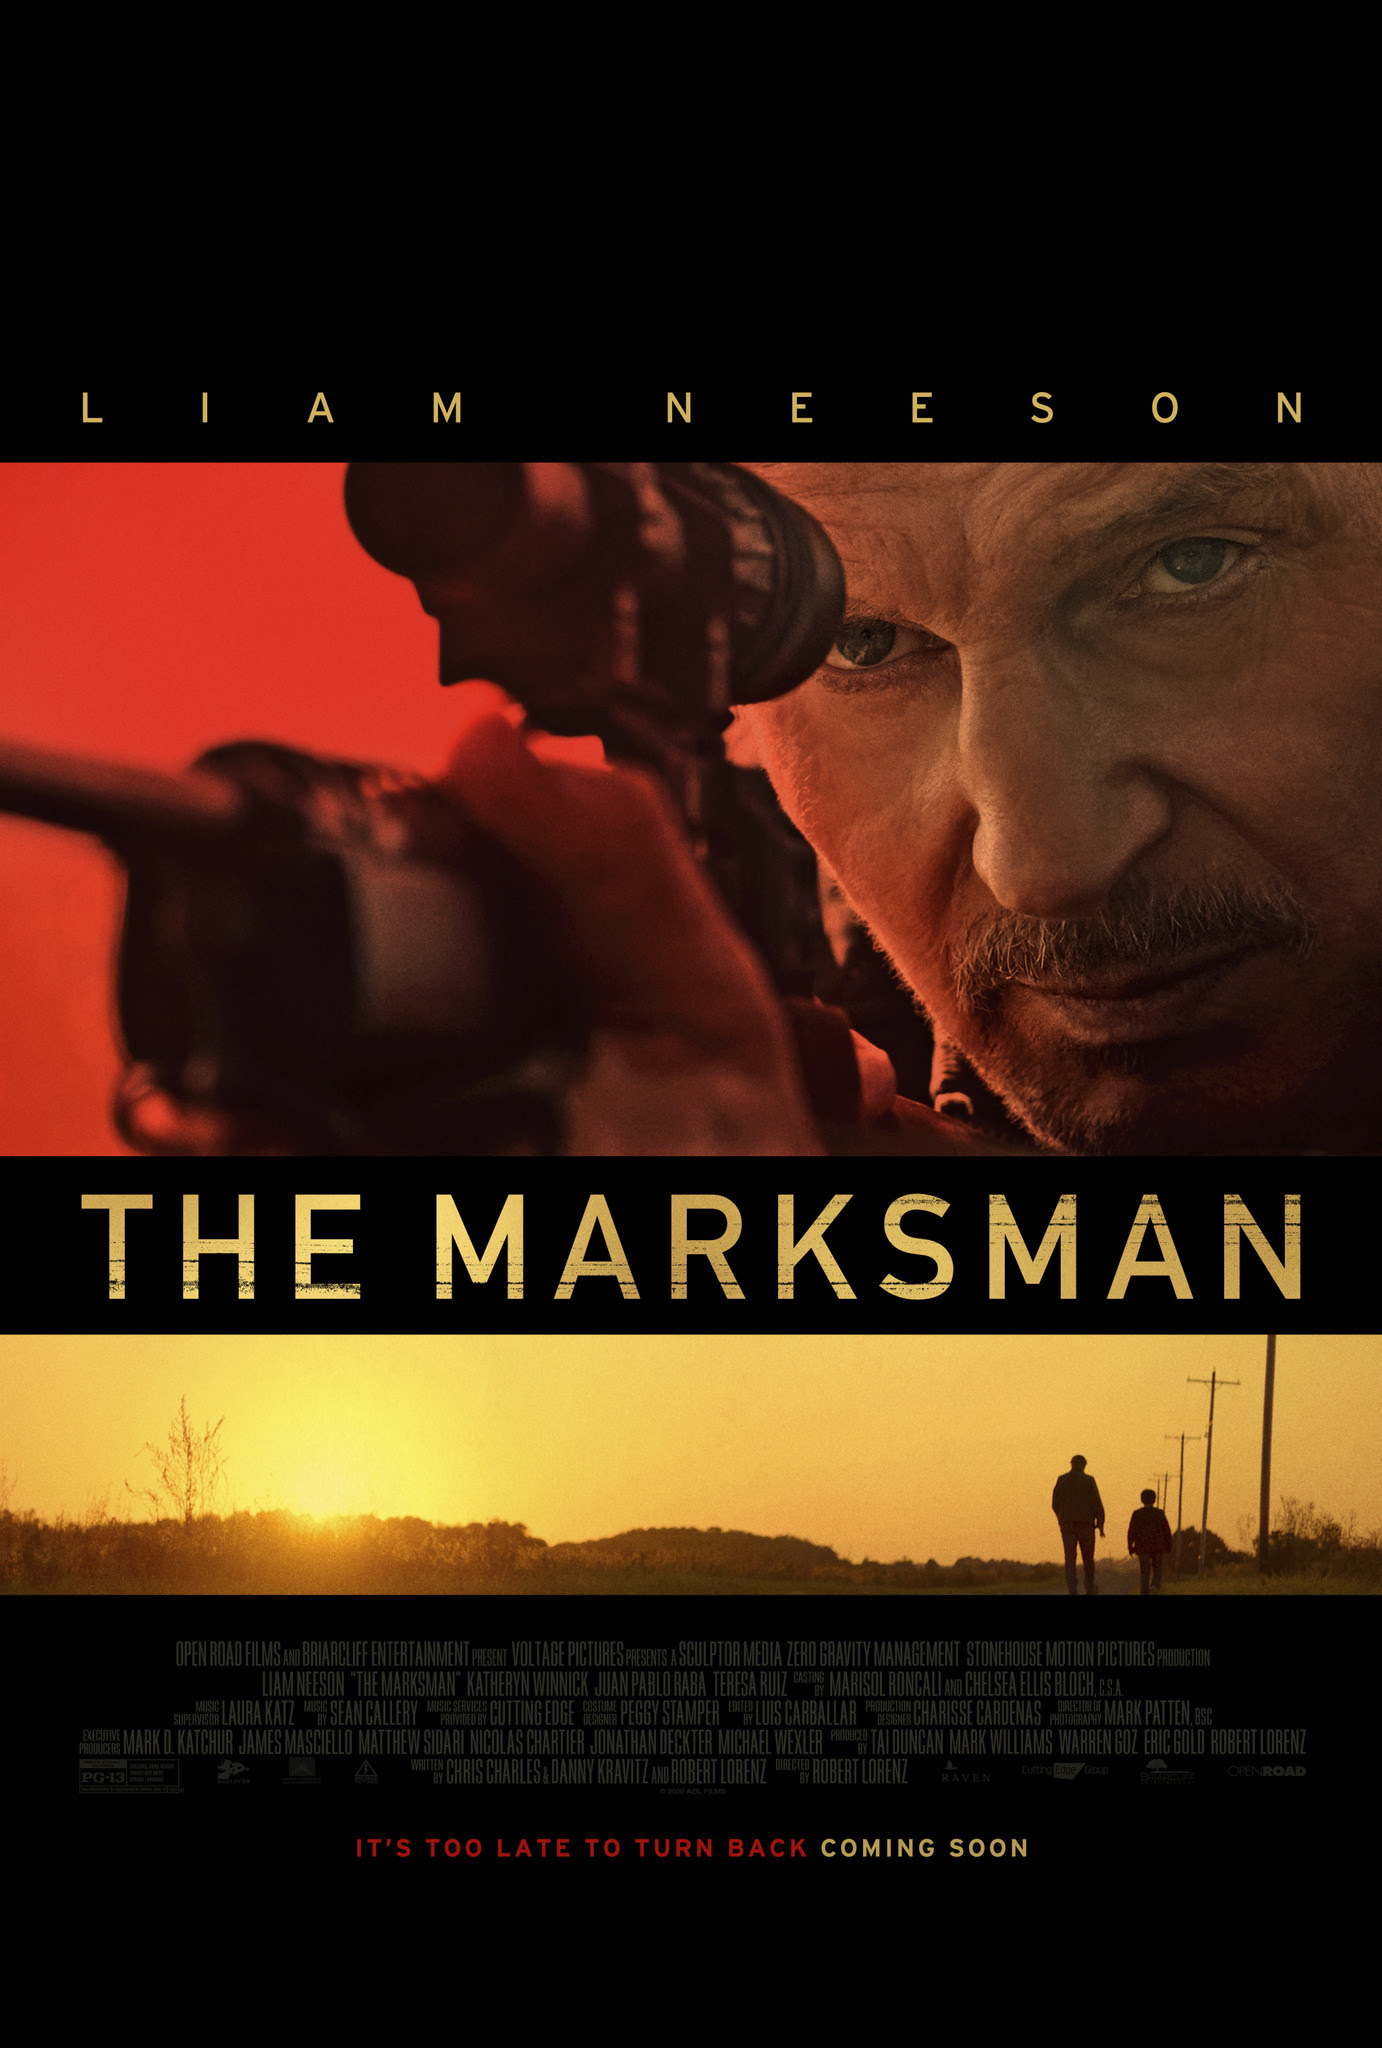 Movie Review: The Marksman * A Slower-Paced Action Film Starring Liam Neeson